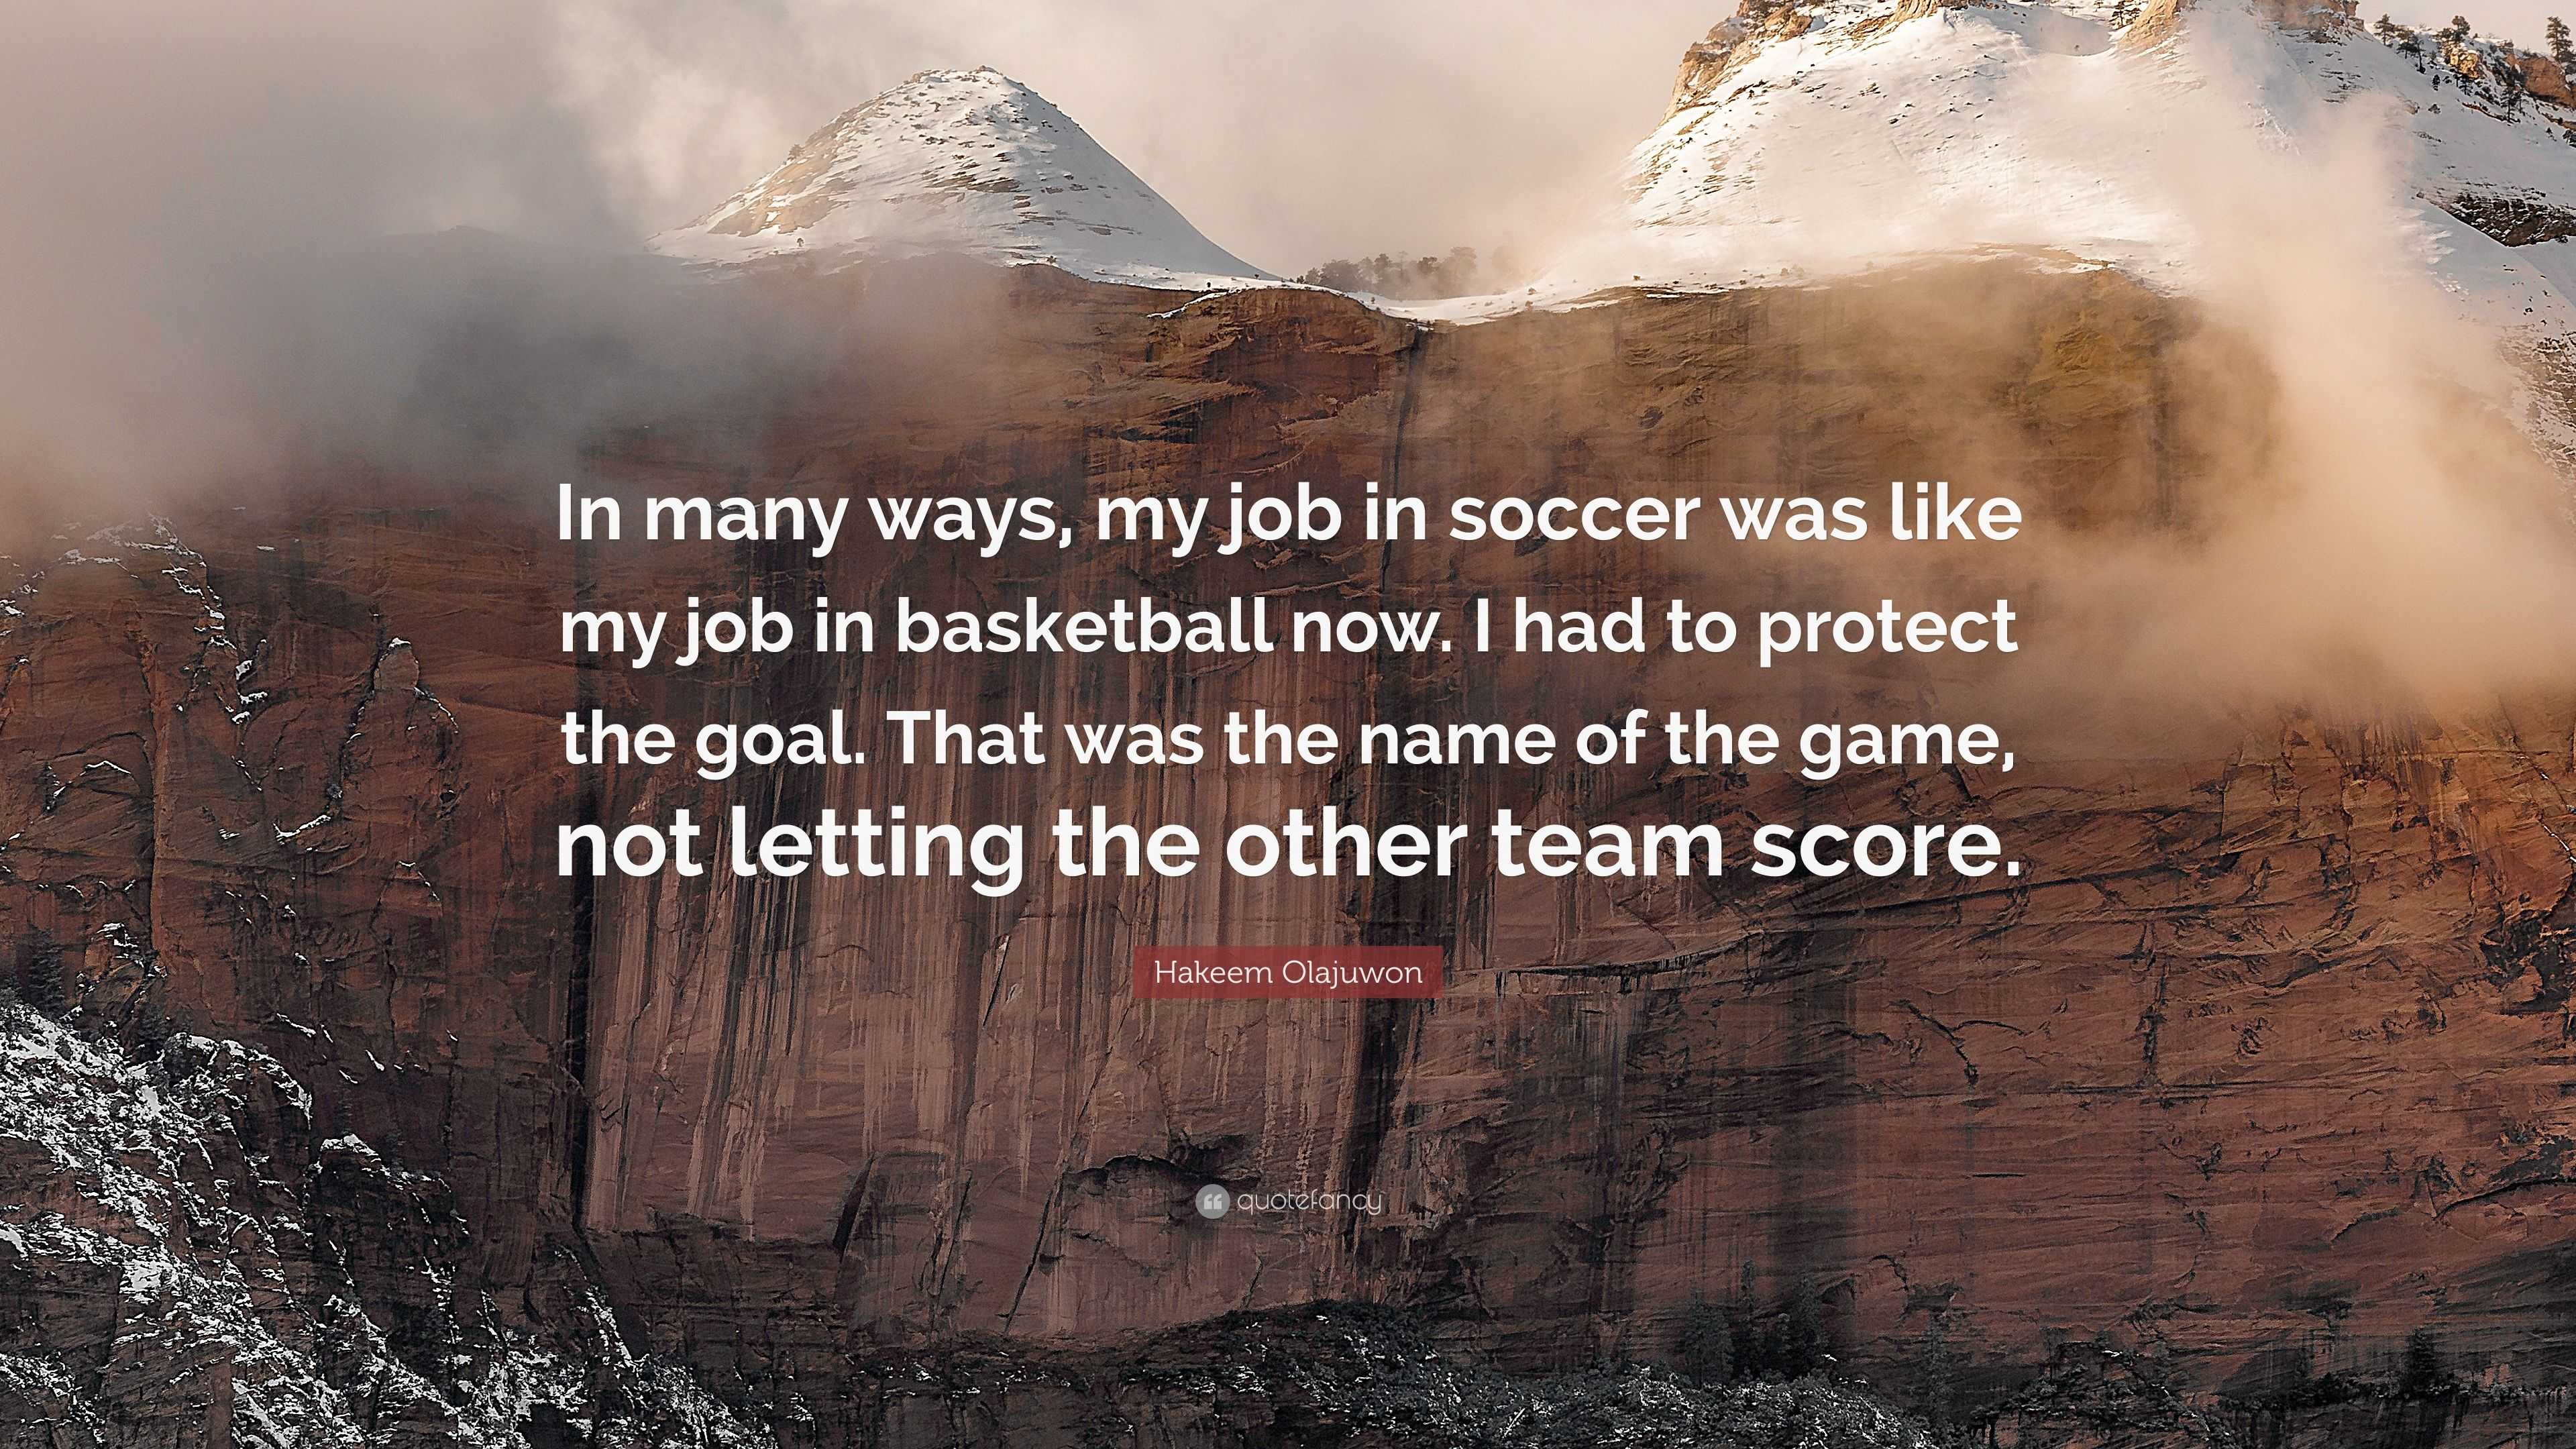 Hakeem Olajuwon Quote: "In many ways, my job in soccer was like my job in basketball now. I had ...